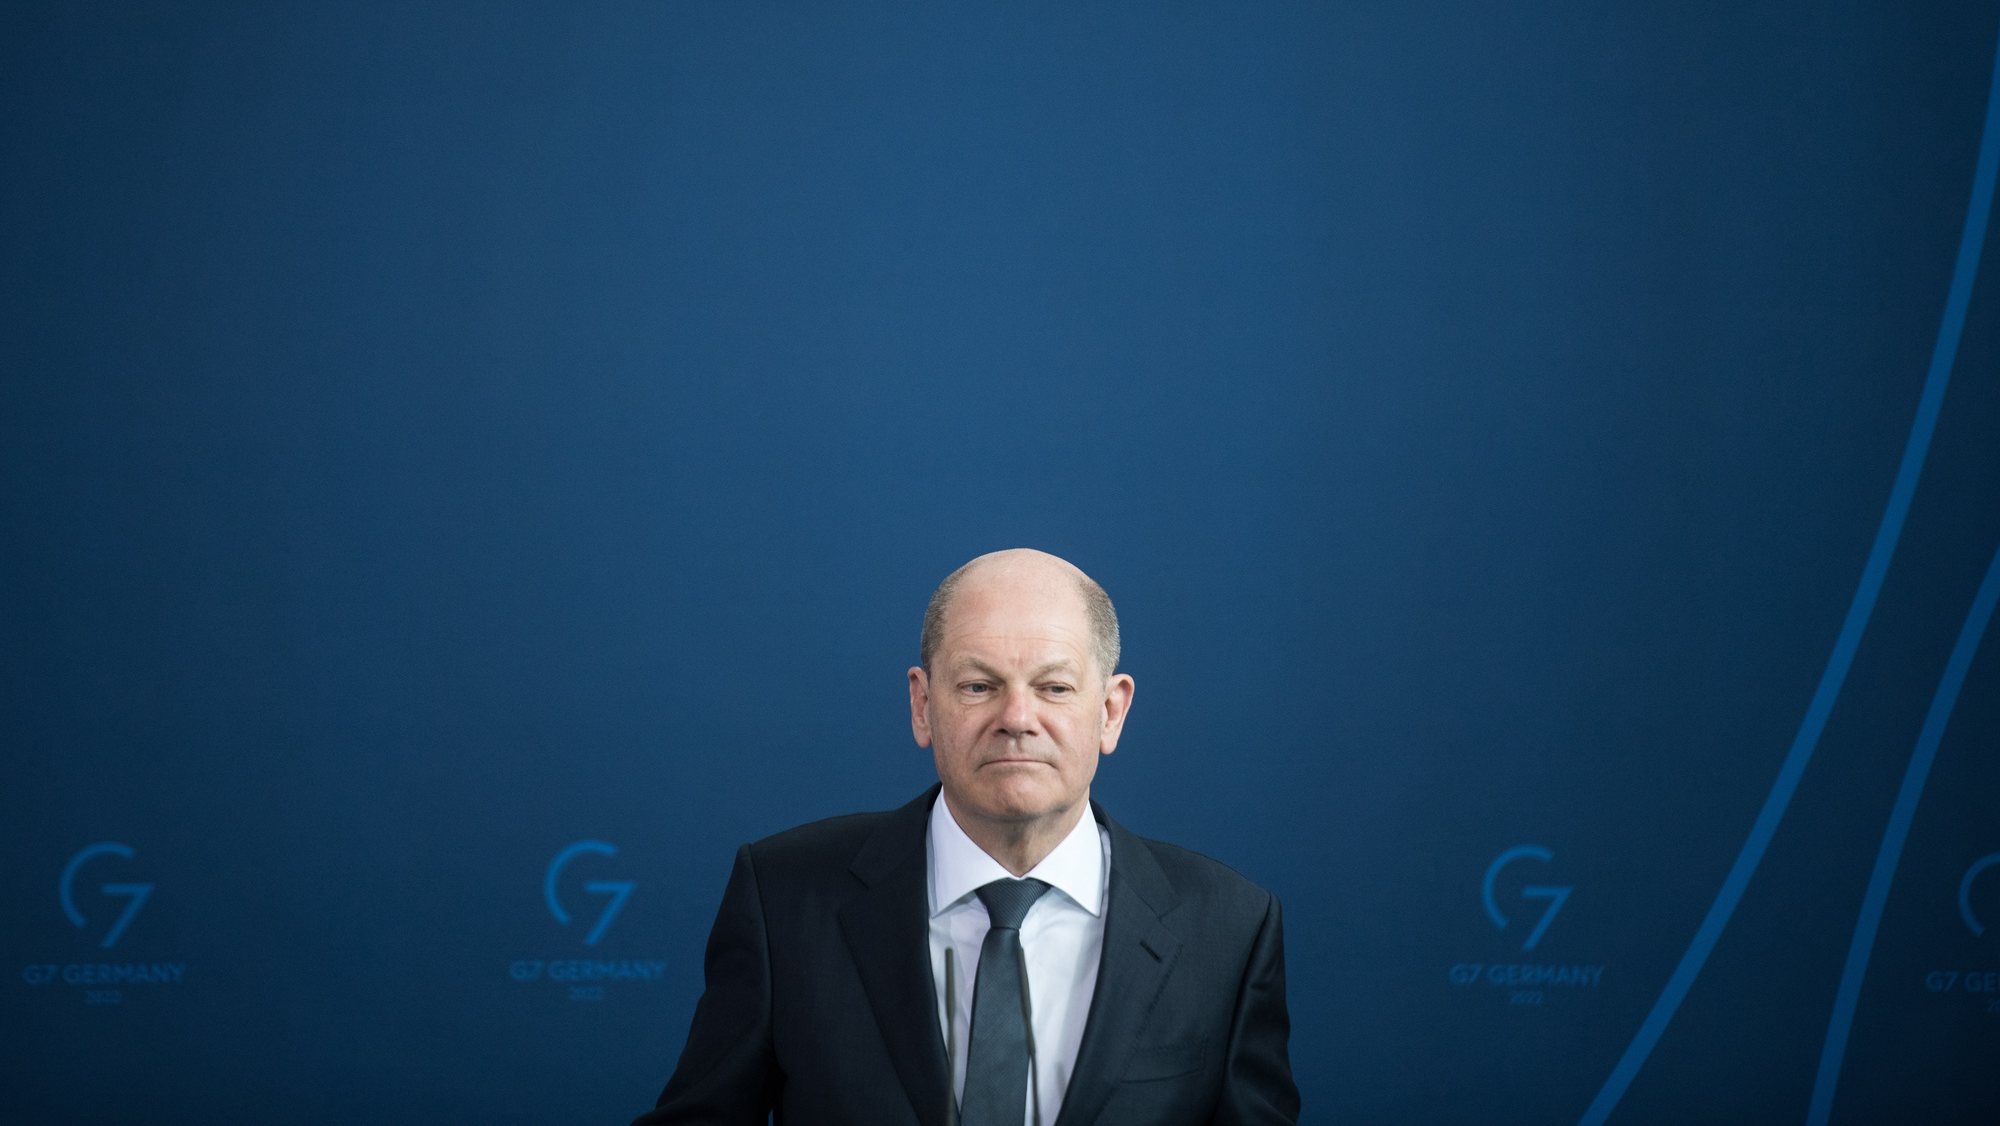 epa09862143 German Chancellor Olaf Scholz during a news conference with Austrian Chancellor Karl Nehammer (not pictured) at the Chancellery in Berlin, Germany, 31 March 2022. The two leaders are meeting as Europe faces possible natural gas shortfalls should Russia decide to halt its natural gas exports to Europe. Meanwhile the Russian military intervention in Ukraine is entering its sixth week.  EPA/Steffi Loos / POOL